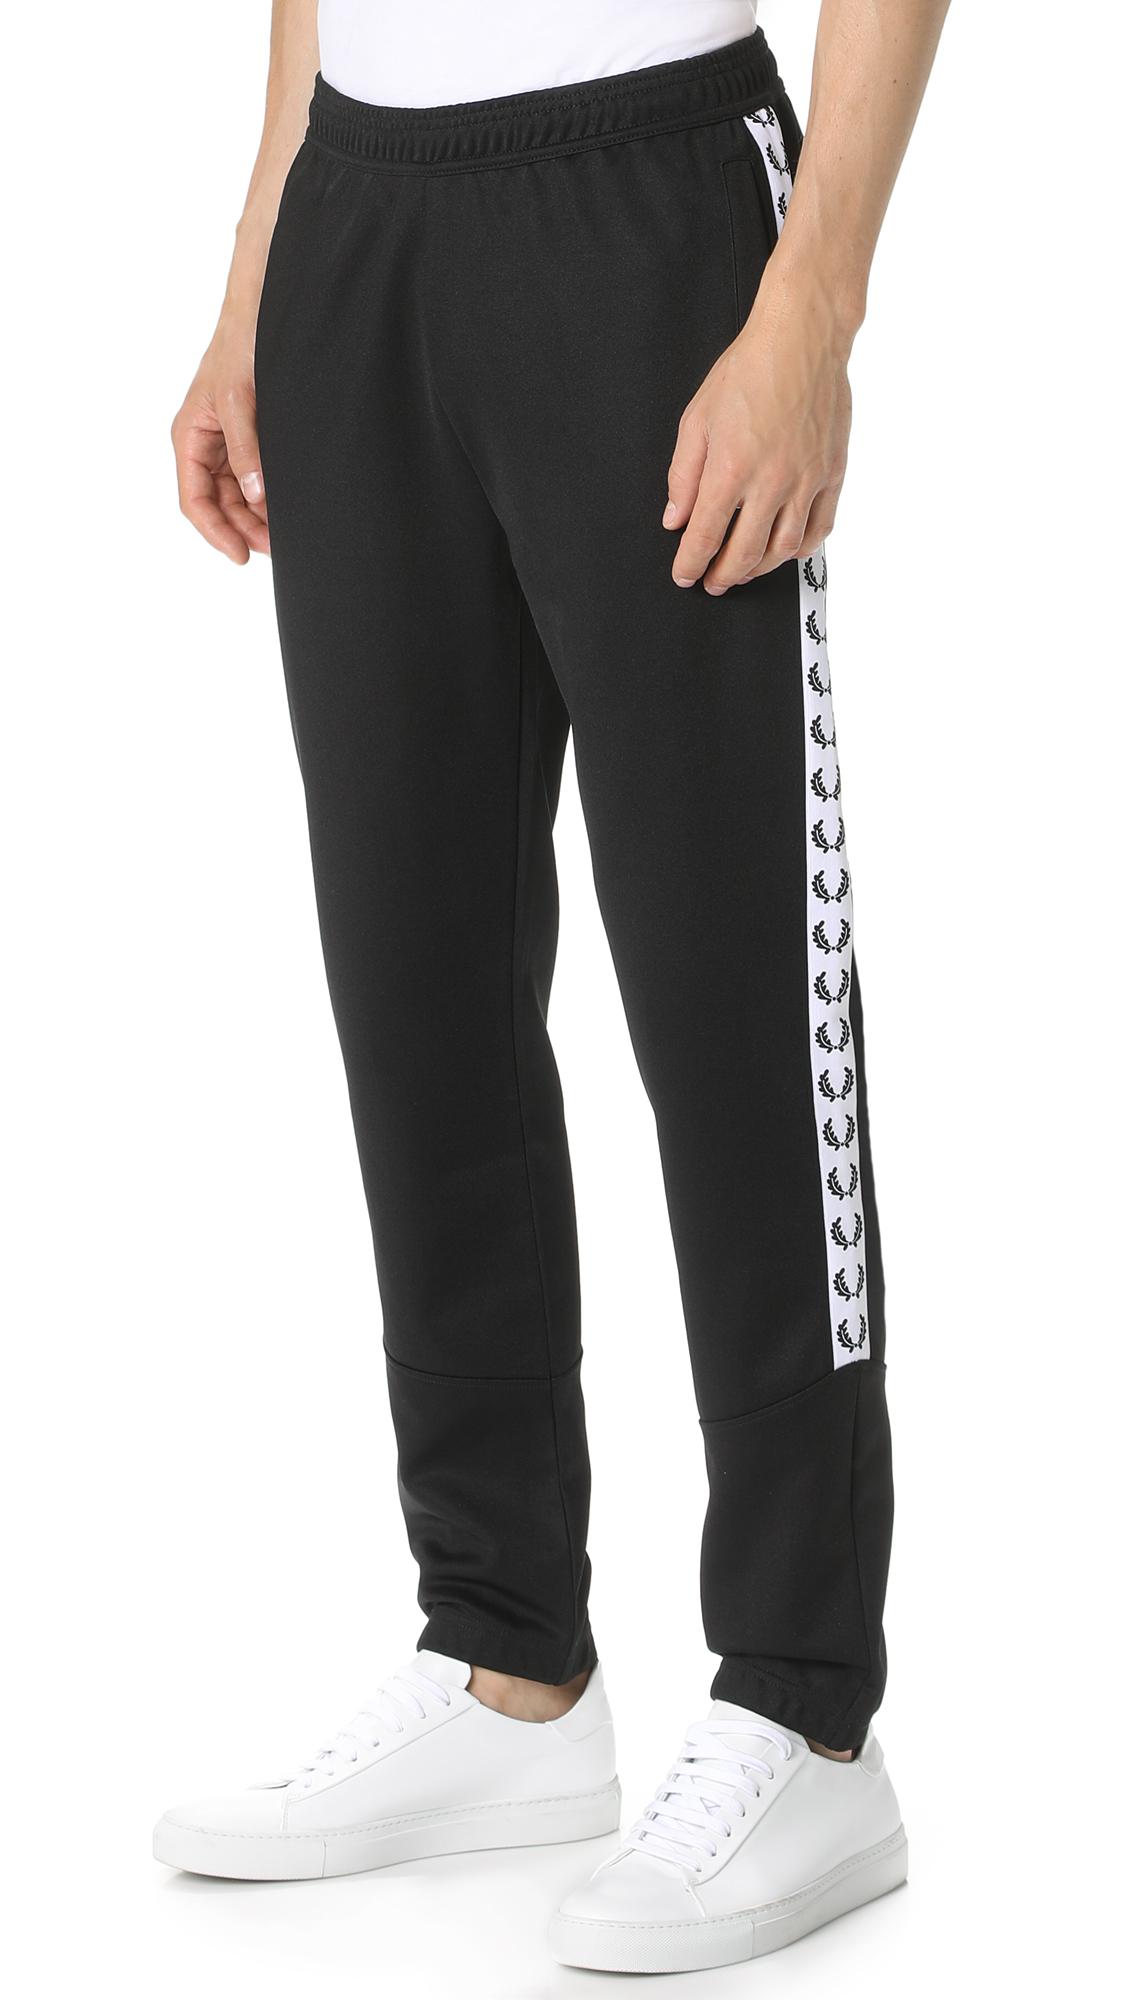 Lyst - Fred Perry Taped Track Pants in Black for Men